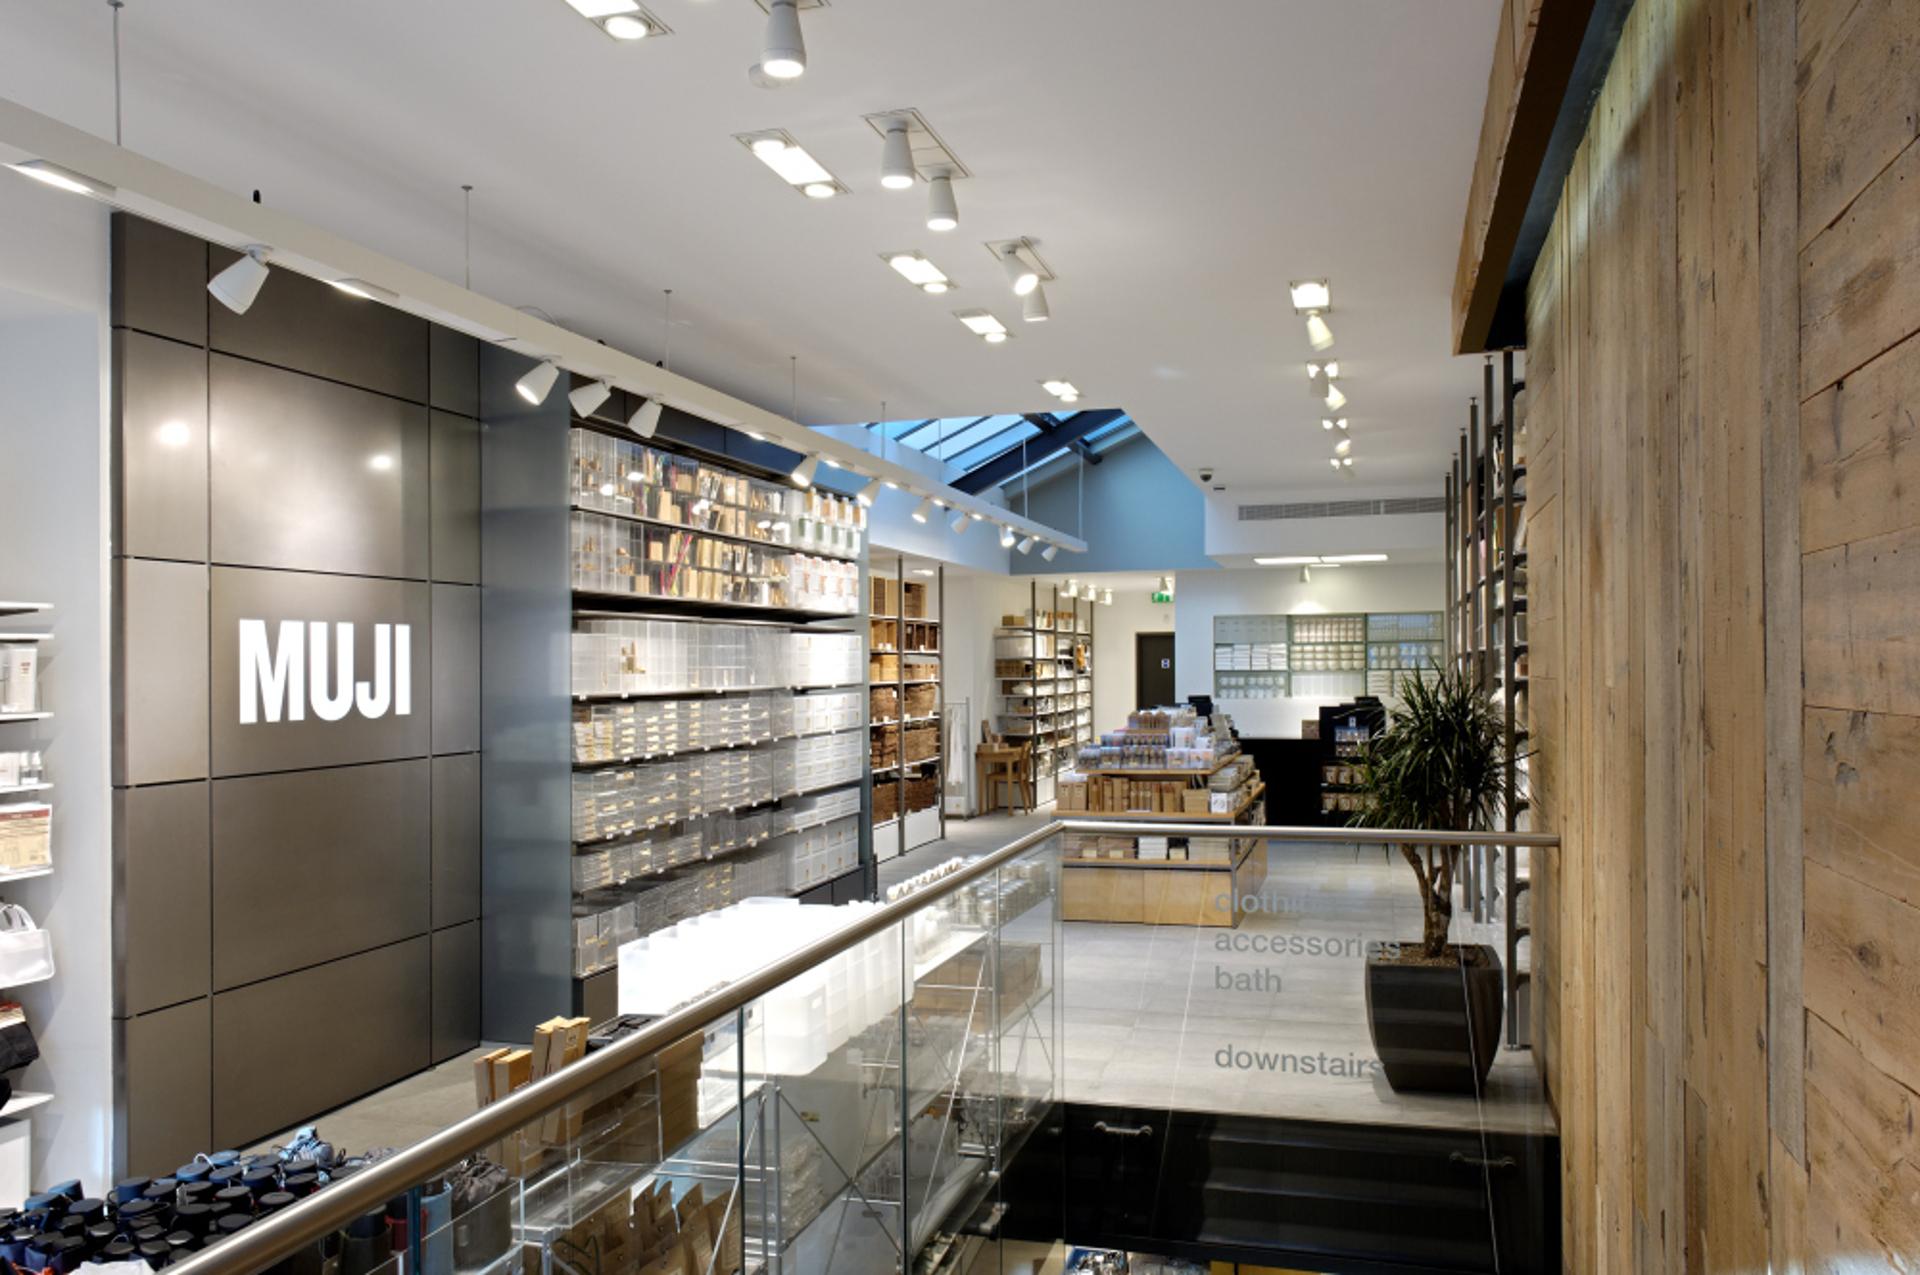 European arm of Japanese chain Muji set to appoint administrators